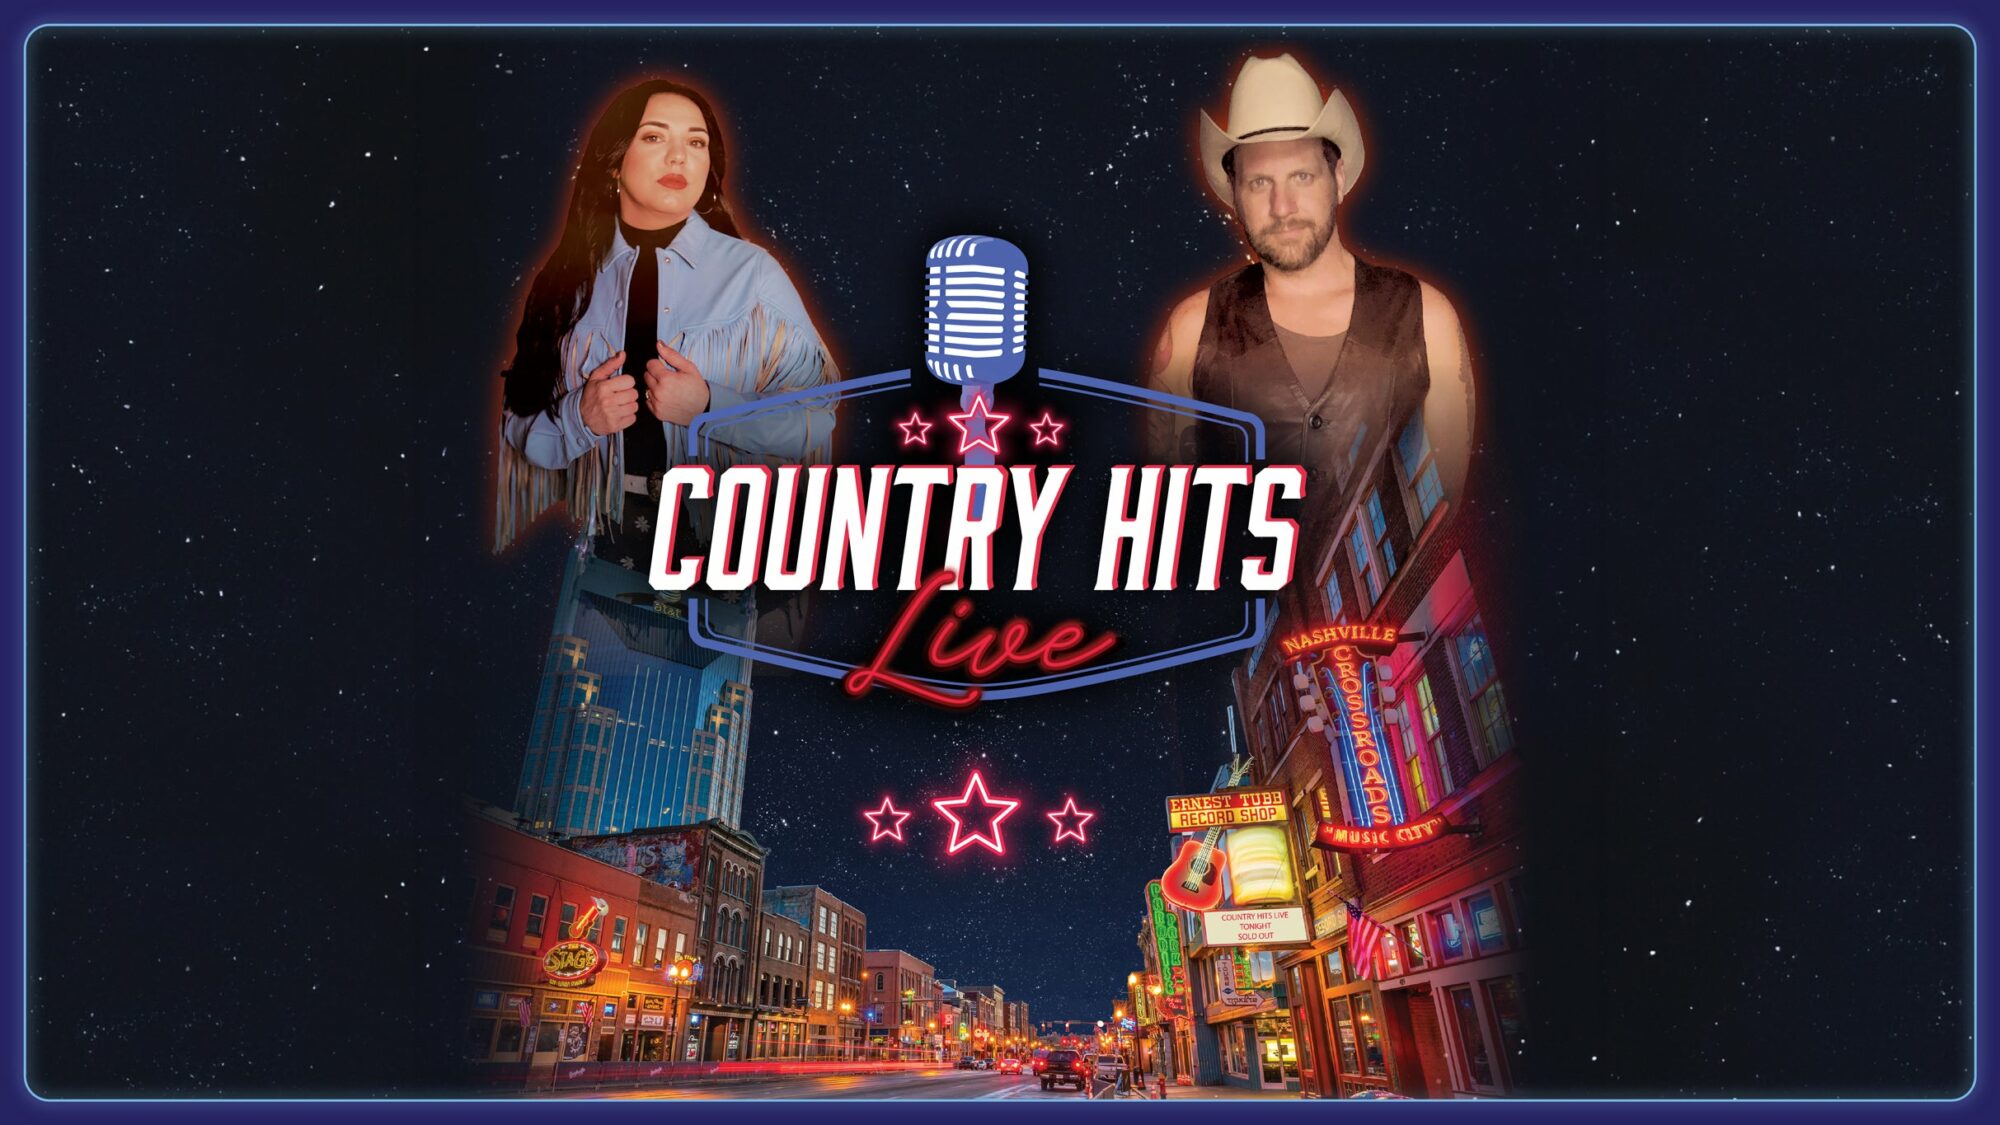 Country Hits Live at Scarborough Spa Theatre, Scarborough